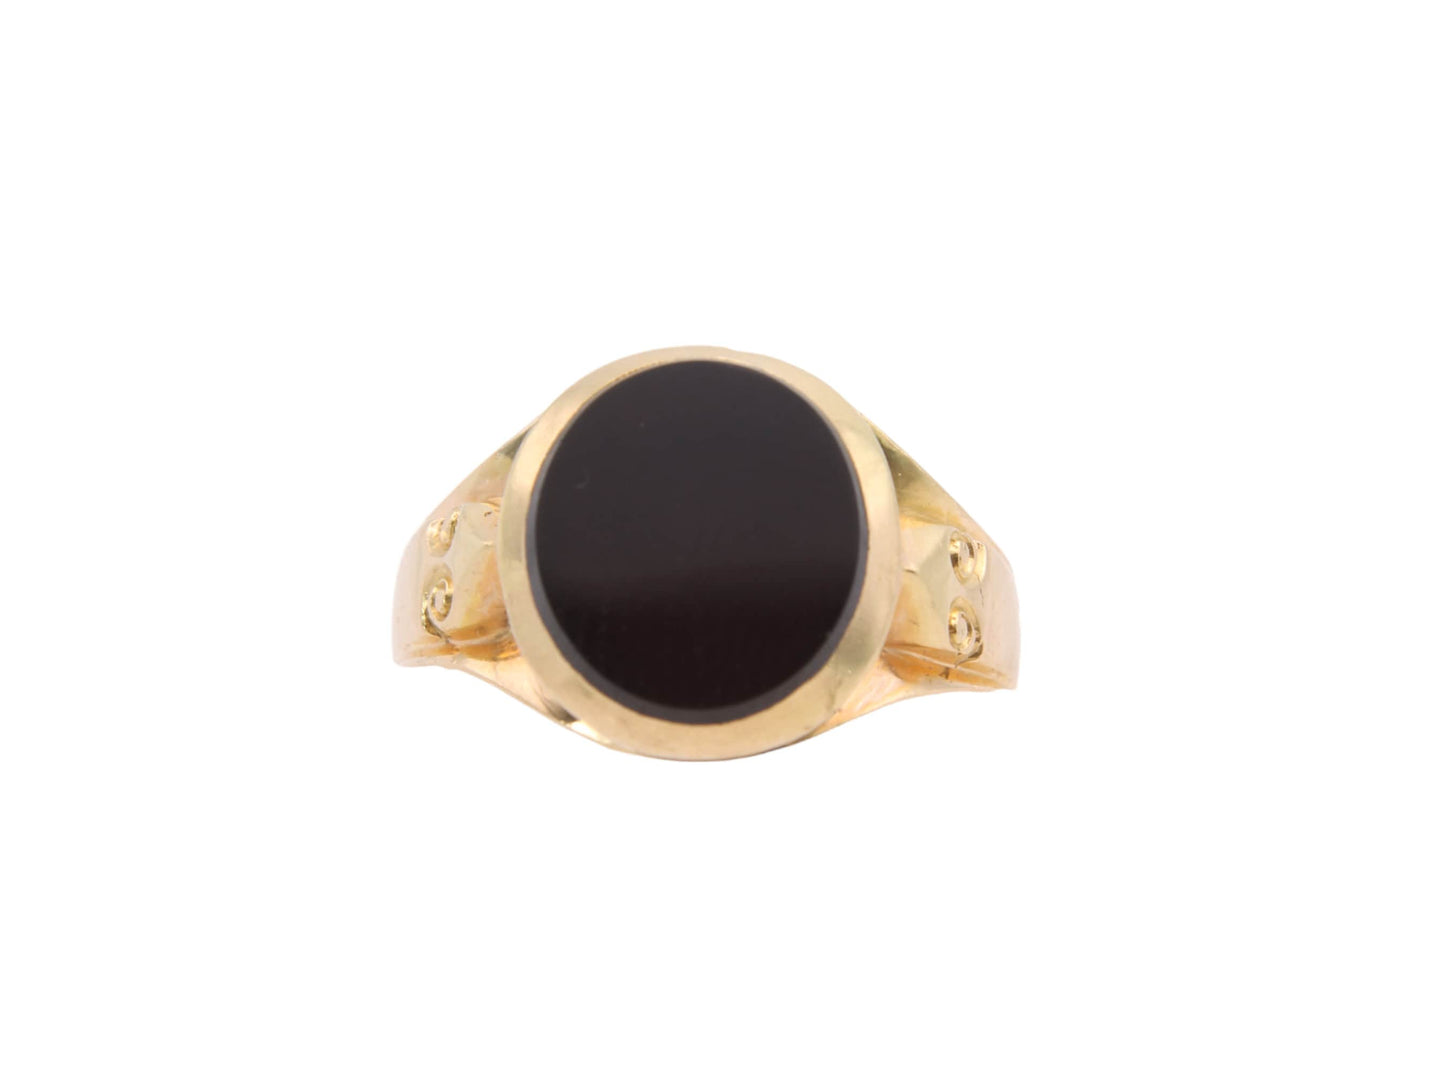 Antique 18ct Yellow Gold Carnelian Agate Signet Ring